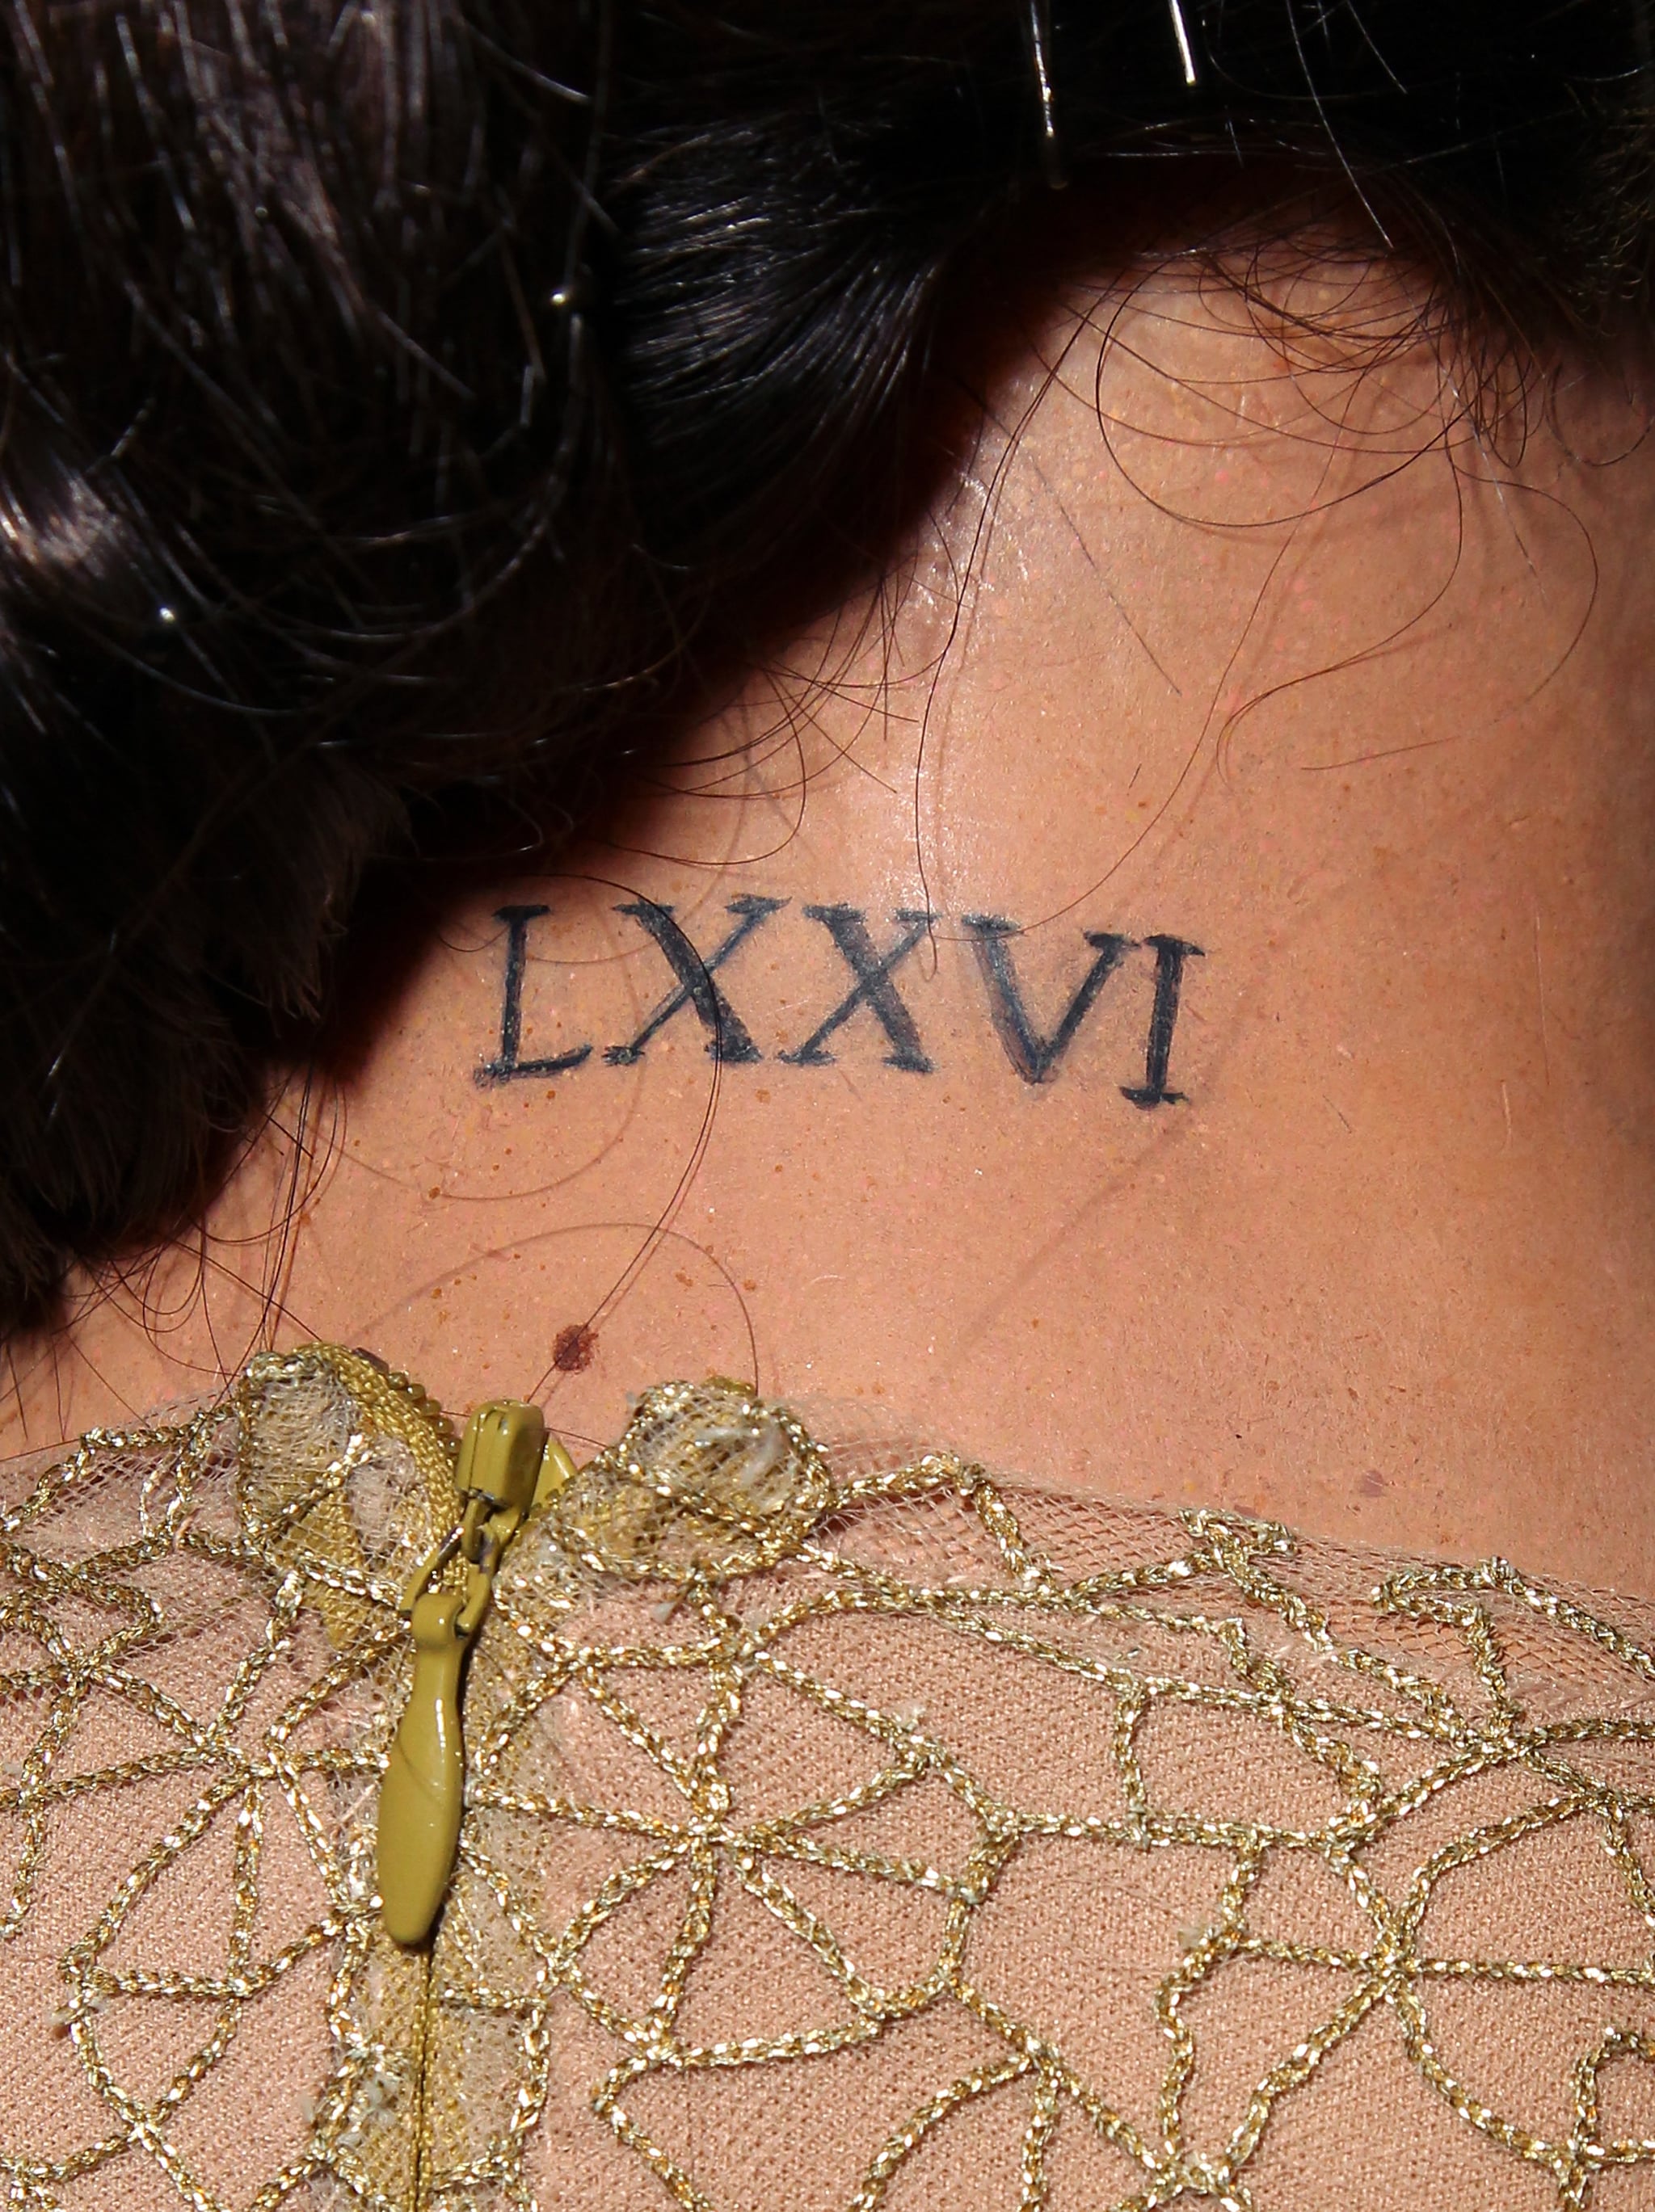 17 Selena Gomezs Tattoos And Their Meanings Full Guide